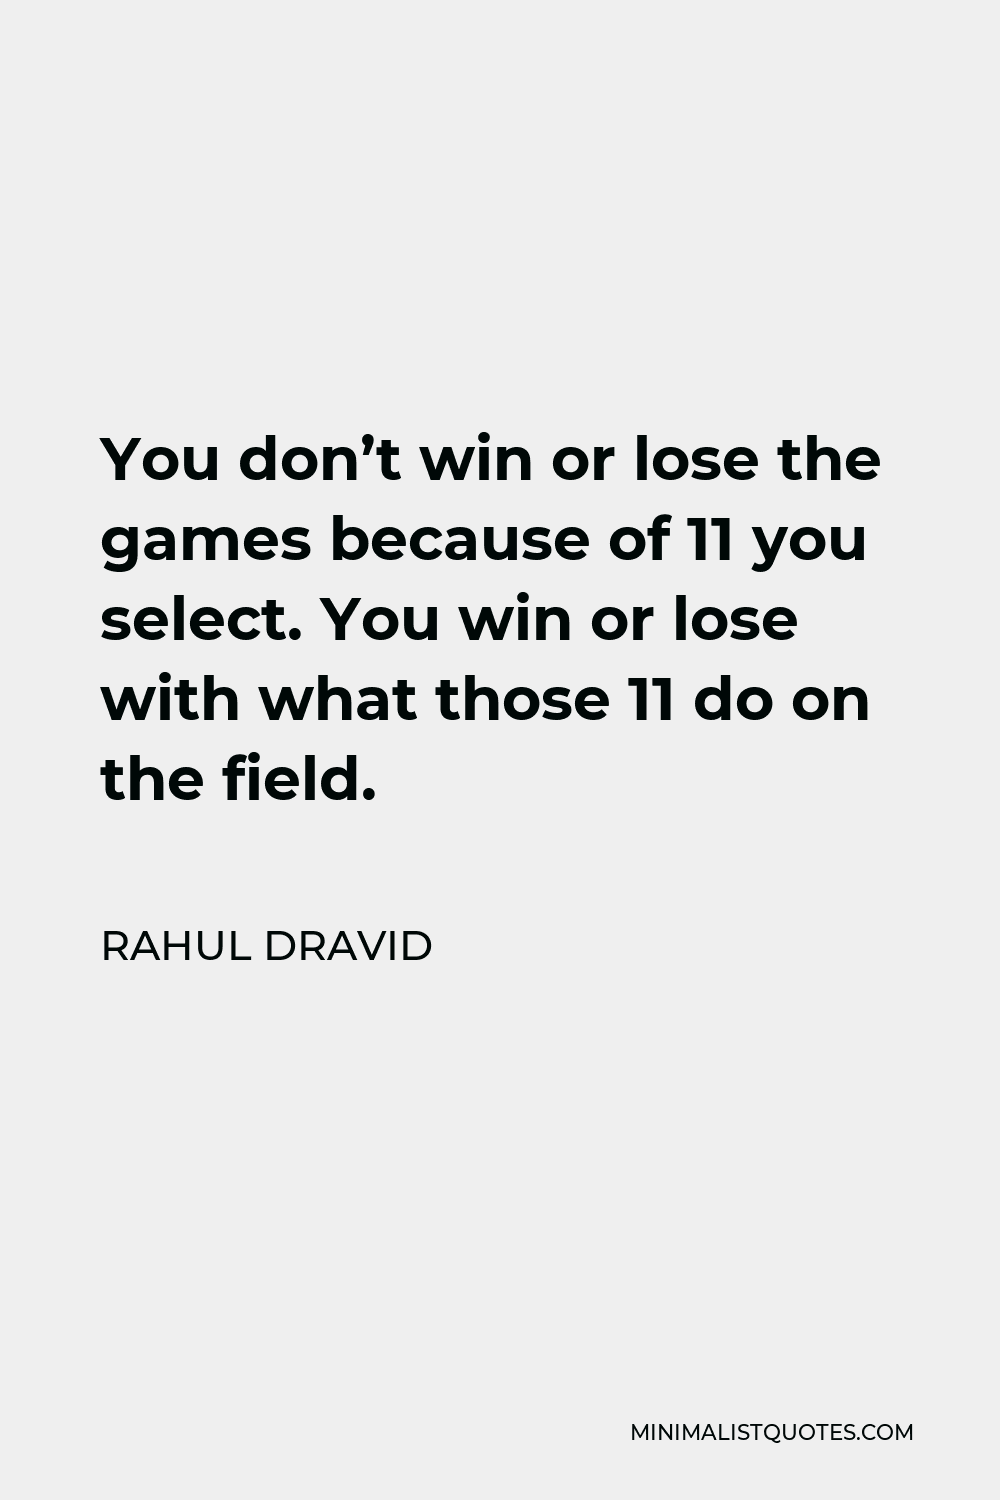 Rahul Dravid Quote - You don’t win or lose the games because of 11 you select. You win or lose with what those 11 do on the field.